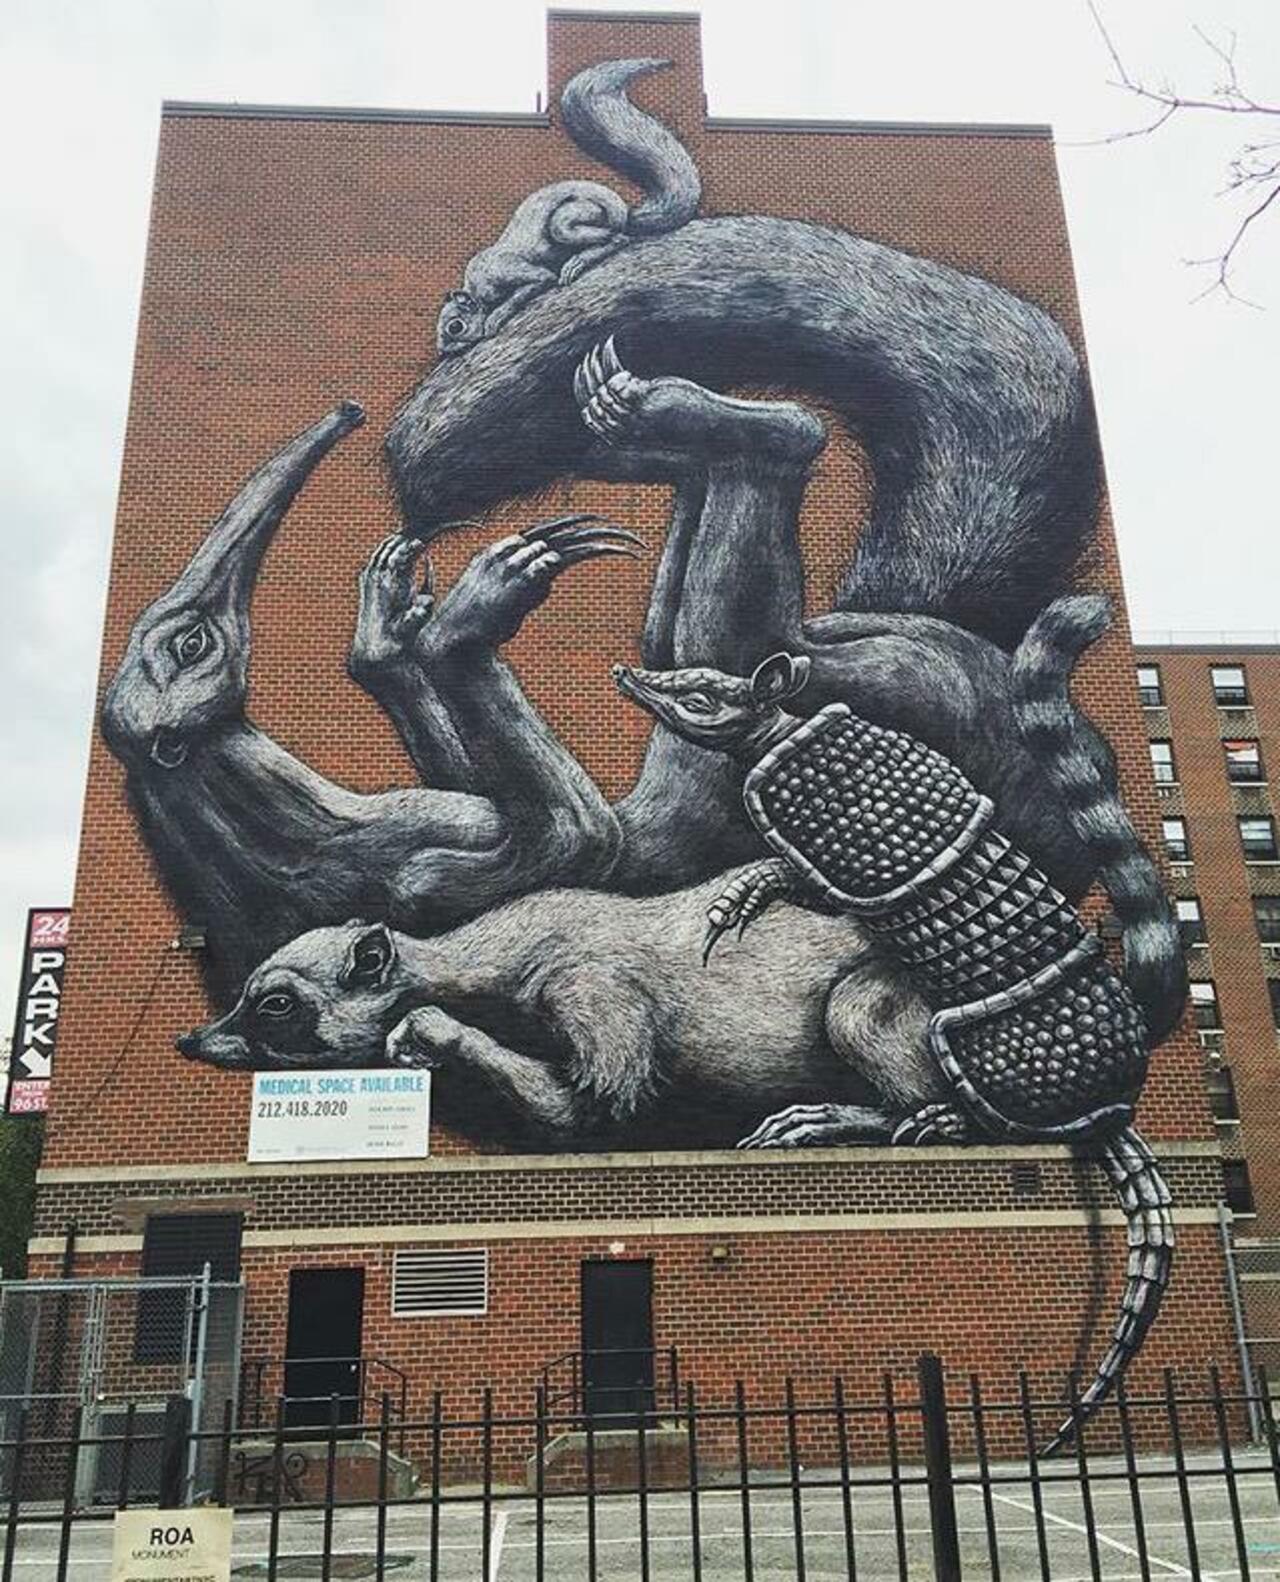 RT belilac "The completed new large scale Street Art wall by ROA in NYC

#art #graffiti #mural #streetart http://t.co/y1vrnCaLT1"